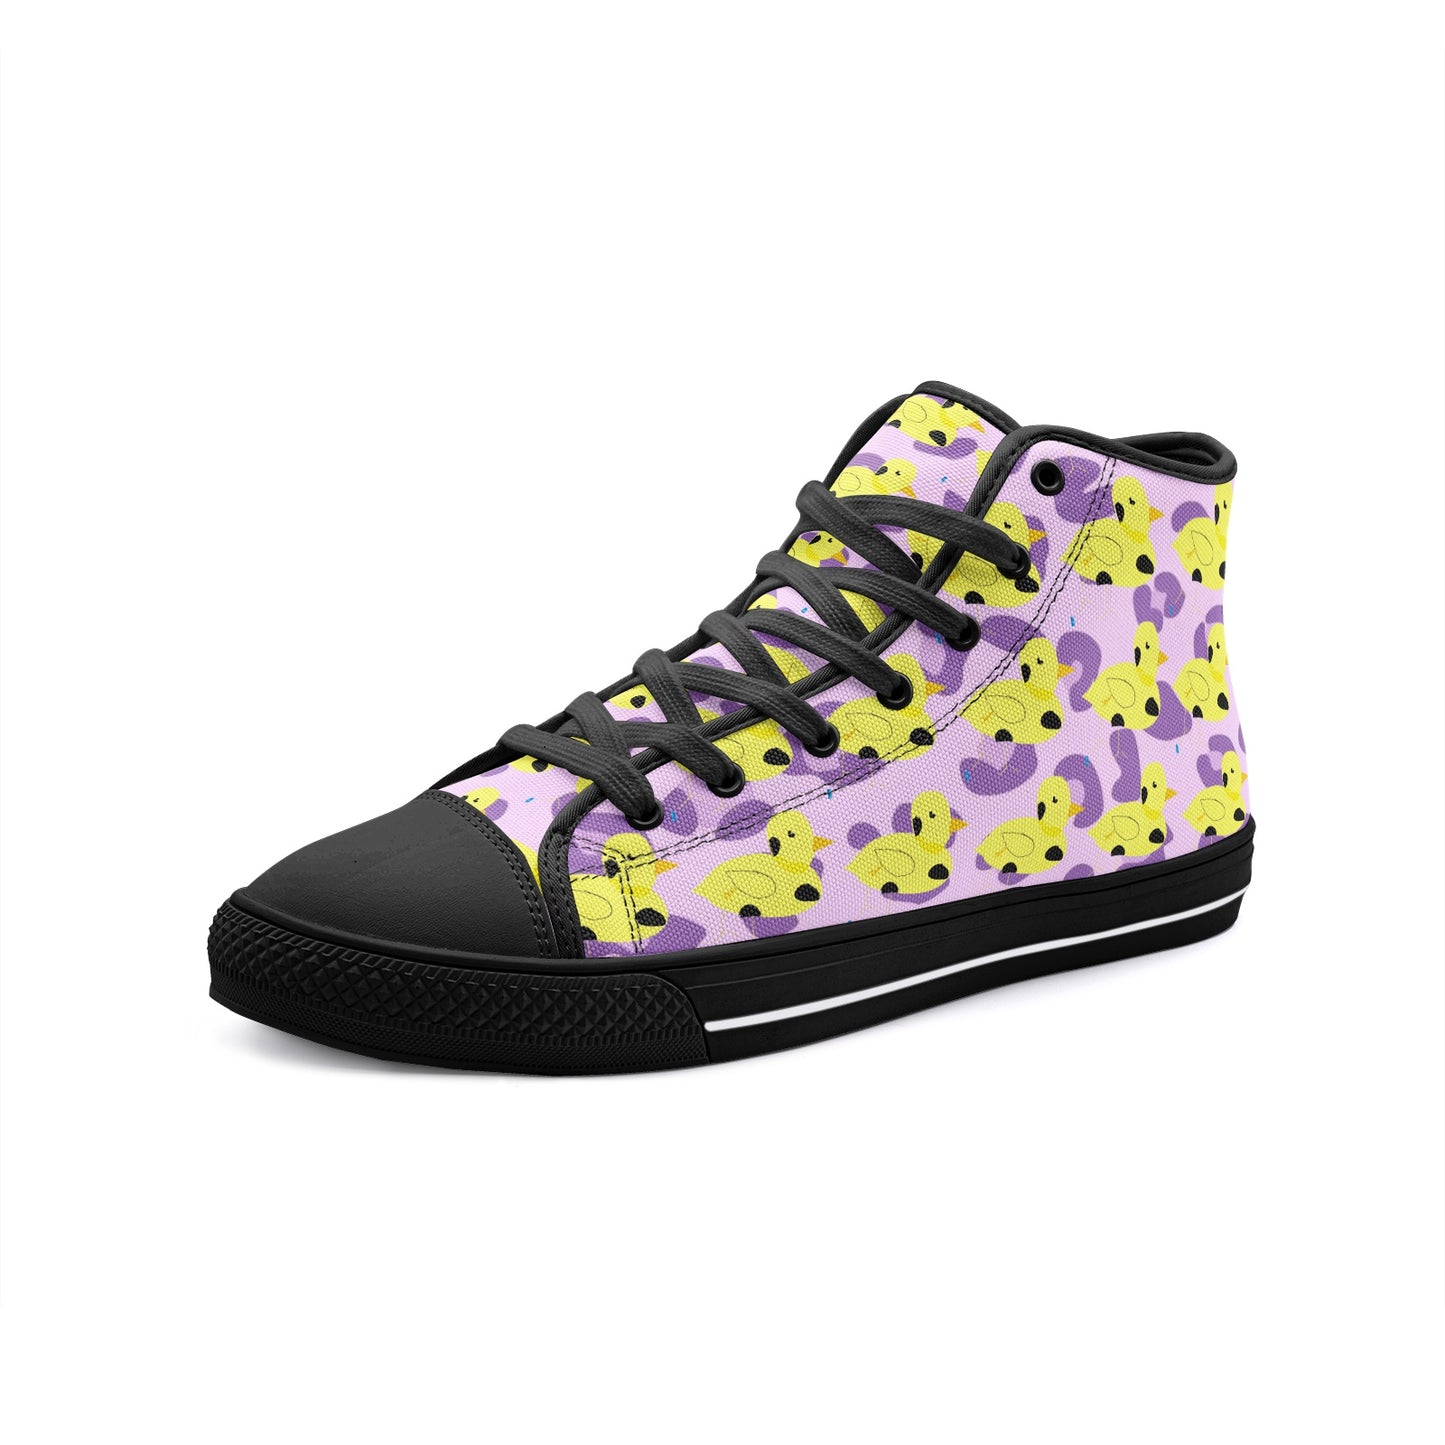 Purple Leopard Print High Top Canvas Shoes with Myrtle the Four-Legged Chicken by D.B. print